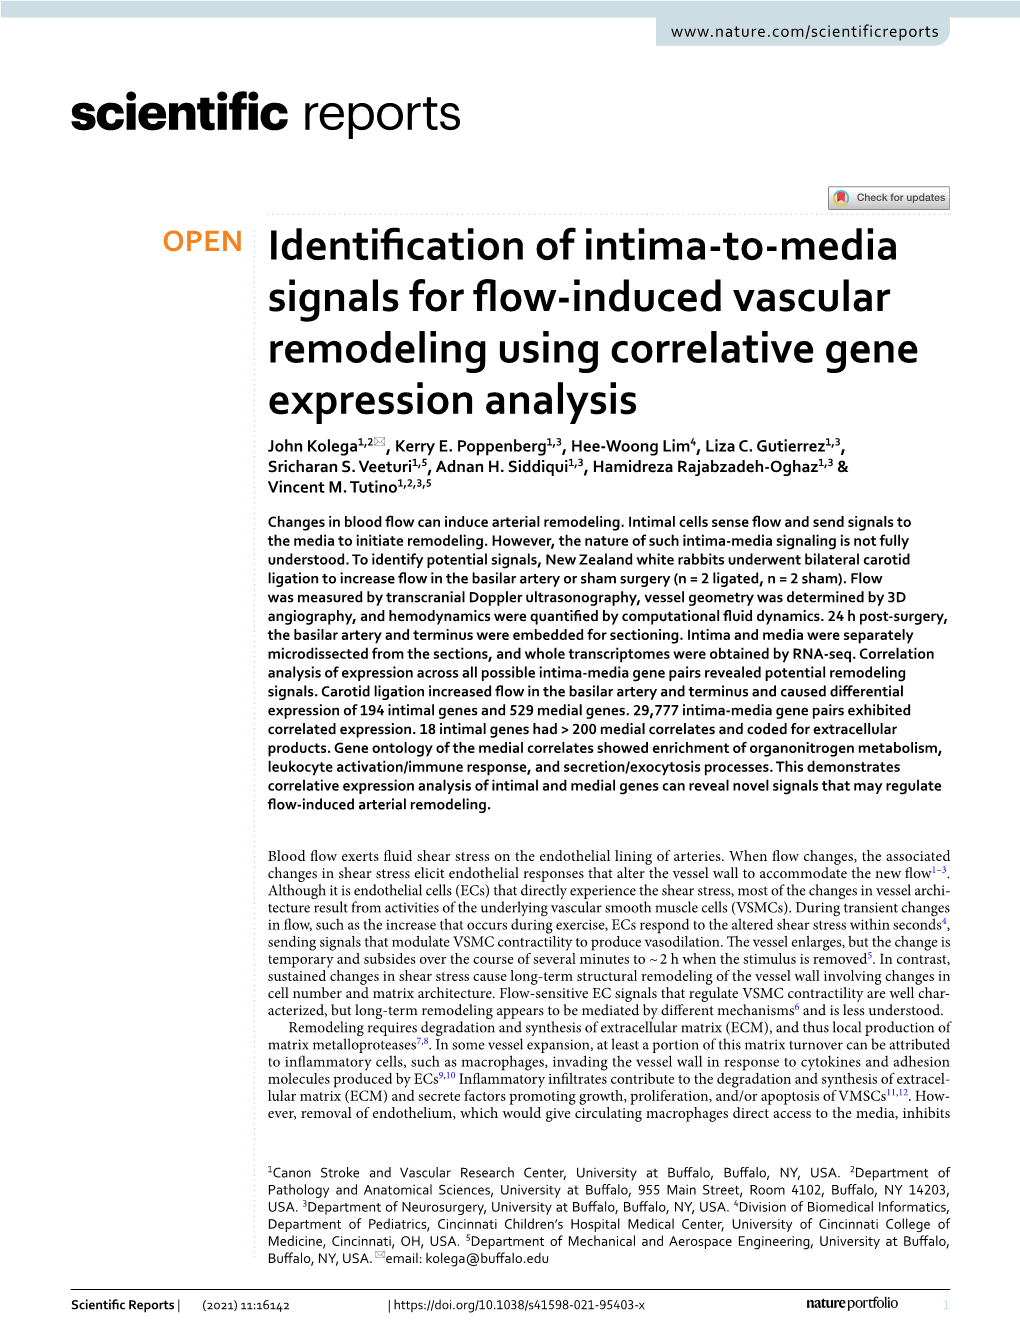 Identification of Intima-To-Media Signals for Flow-Induced Vascular Remodeling Using Correlative Gene Expression Analysis